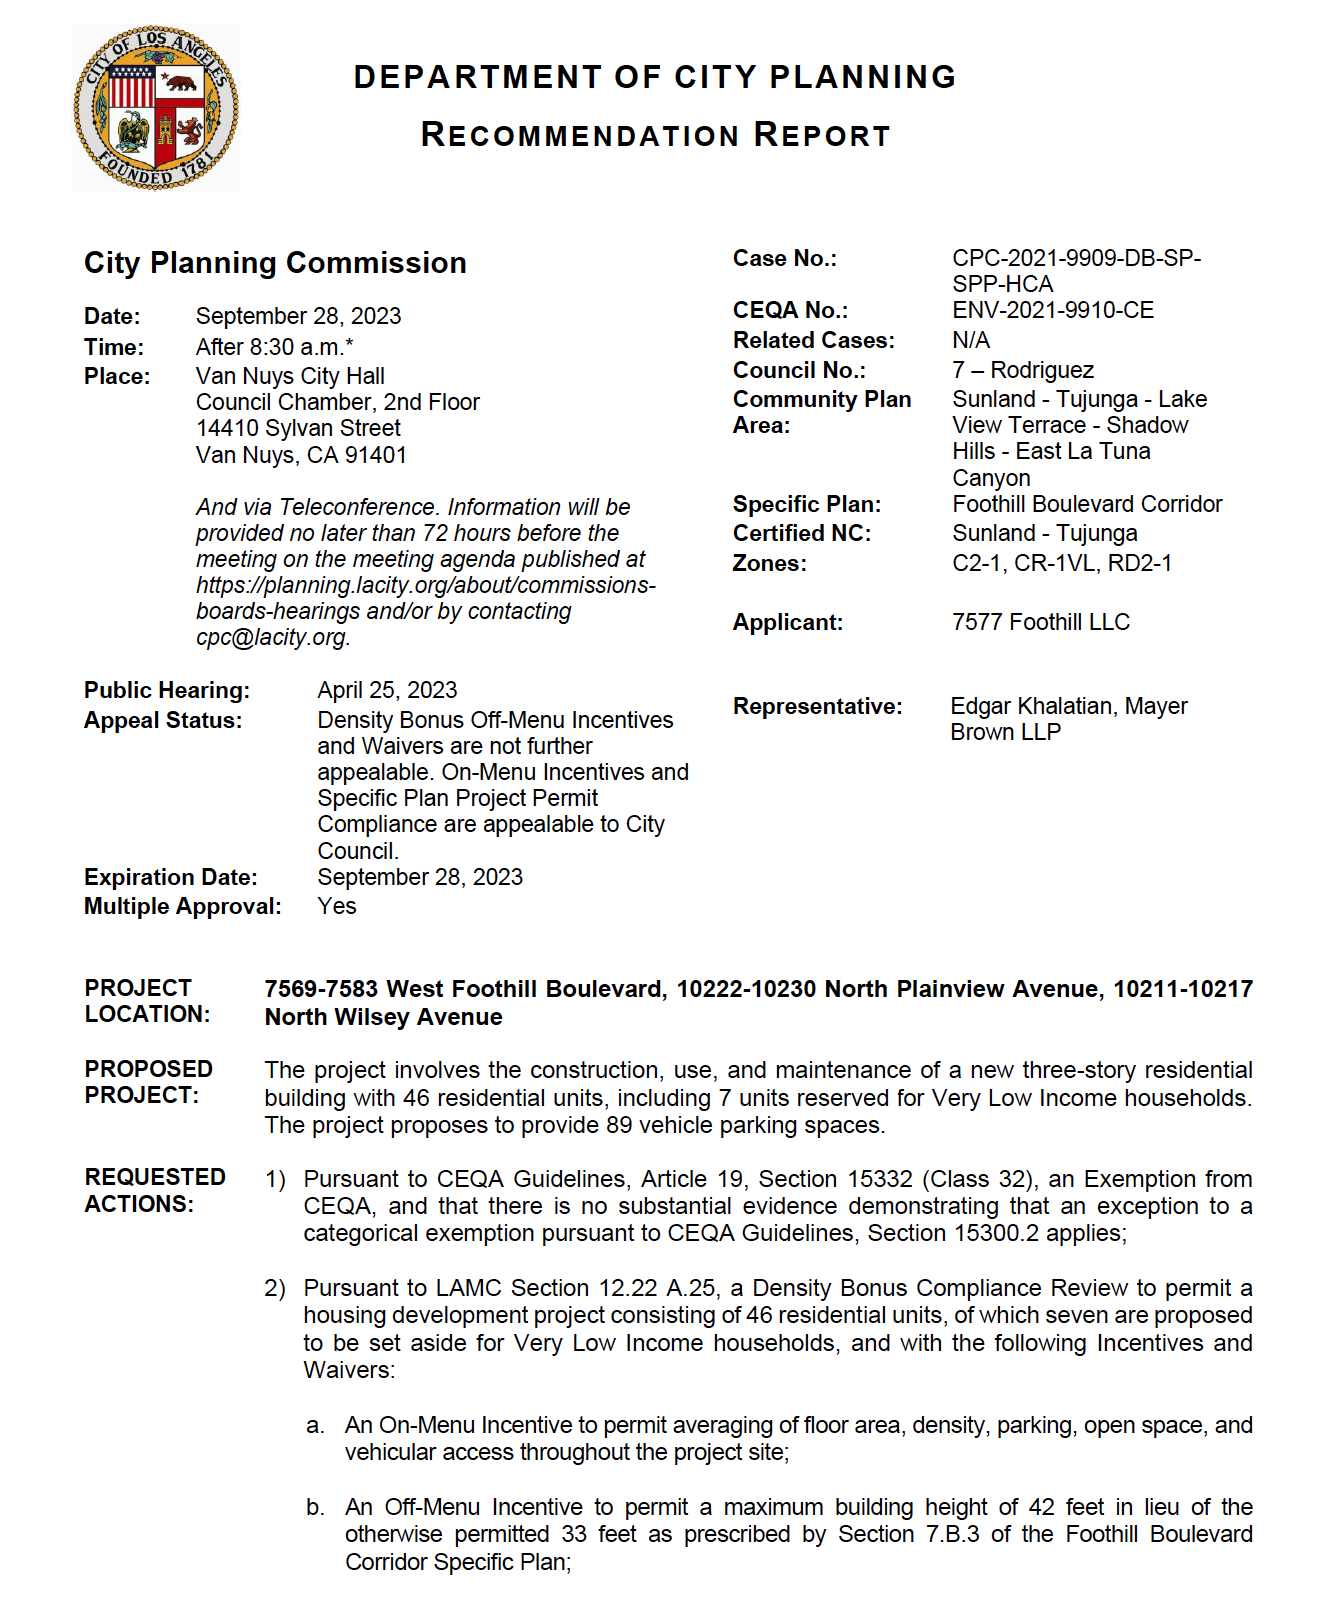 Notice of Hearing - Former Denny's Site - 7577 Foothill Blvd.